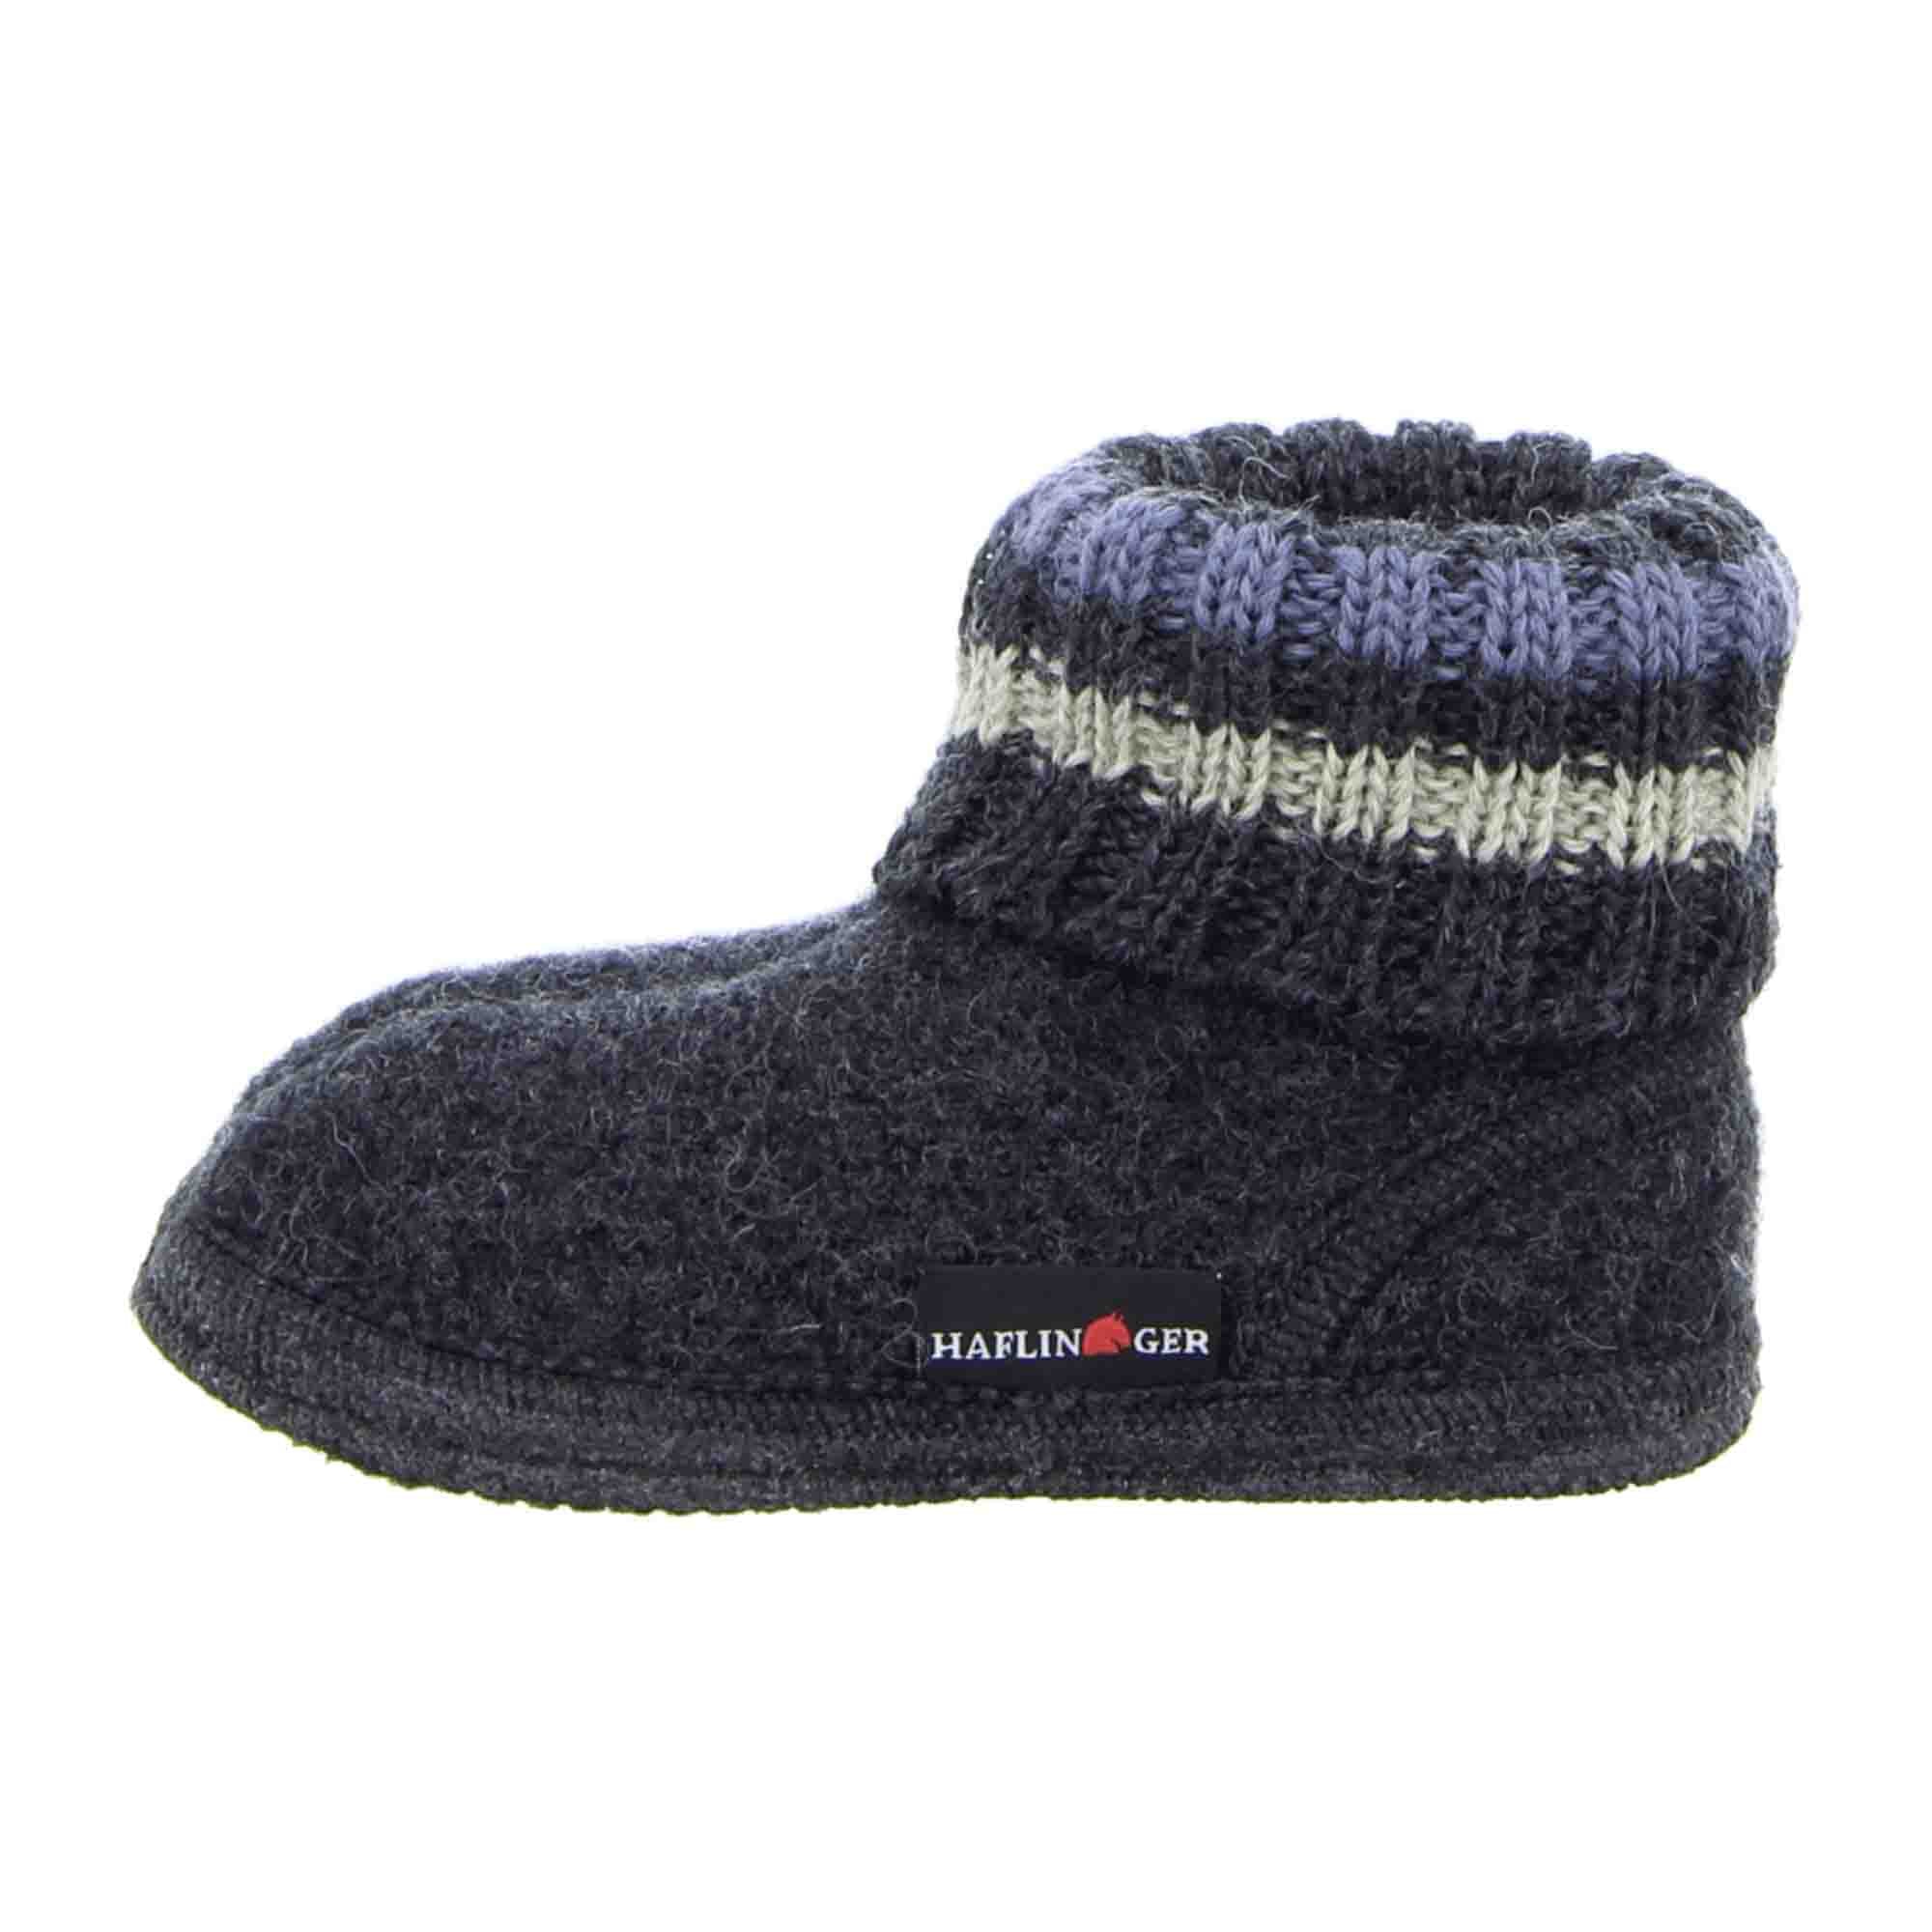 Haflinger Boys' Toddler Slippers - Durable and Stylish Grey Footwear for Kids